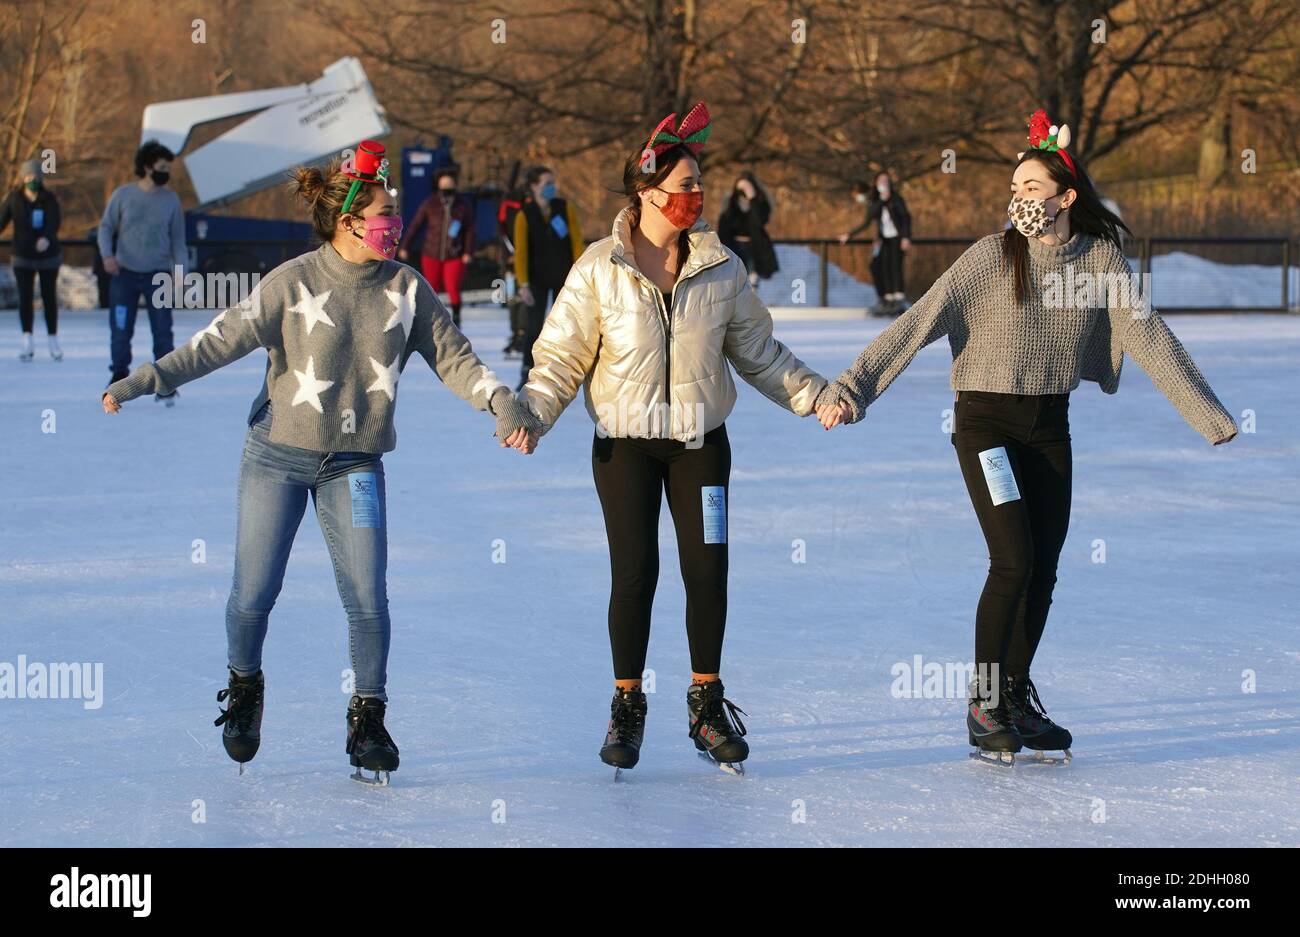 St. Louis, United States. 10th Dec, 2020. Skaters (L to R) Gabby Garcia, Alex Behlmann and Mia Eckl, hold hands as they skate in circles at Steinberg Ice Rink in St. Louis on Thursday, December 10, 2020. Unseasonable warm temperatures reached 70 degrees on the day, with colder temperatures expected for the weekend. Photo by Bill Greenblatt/UPI Credit: UPI/Alamy Live News Stock Photo